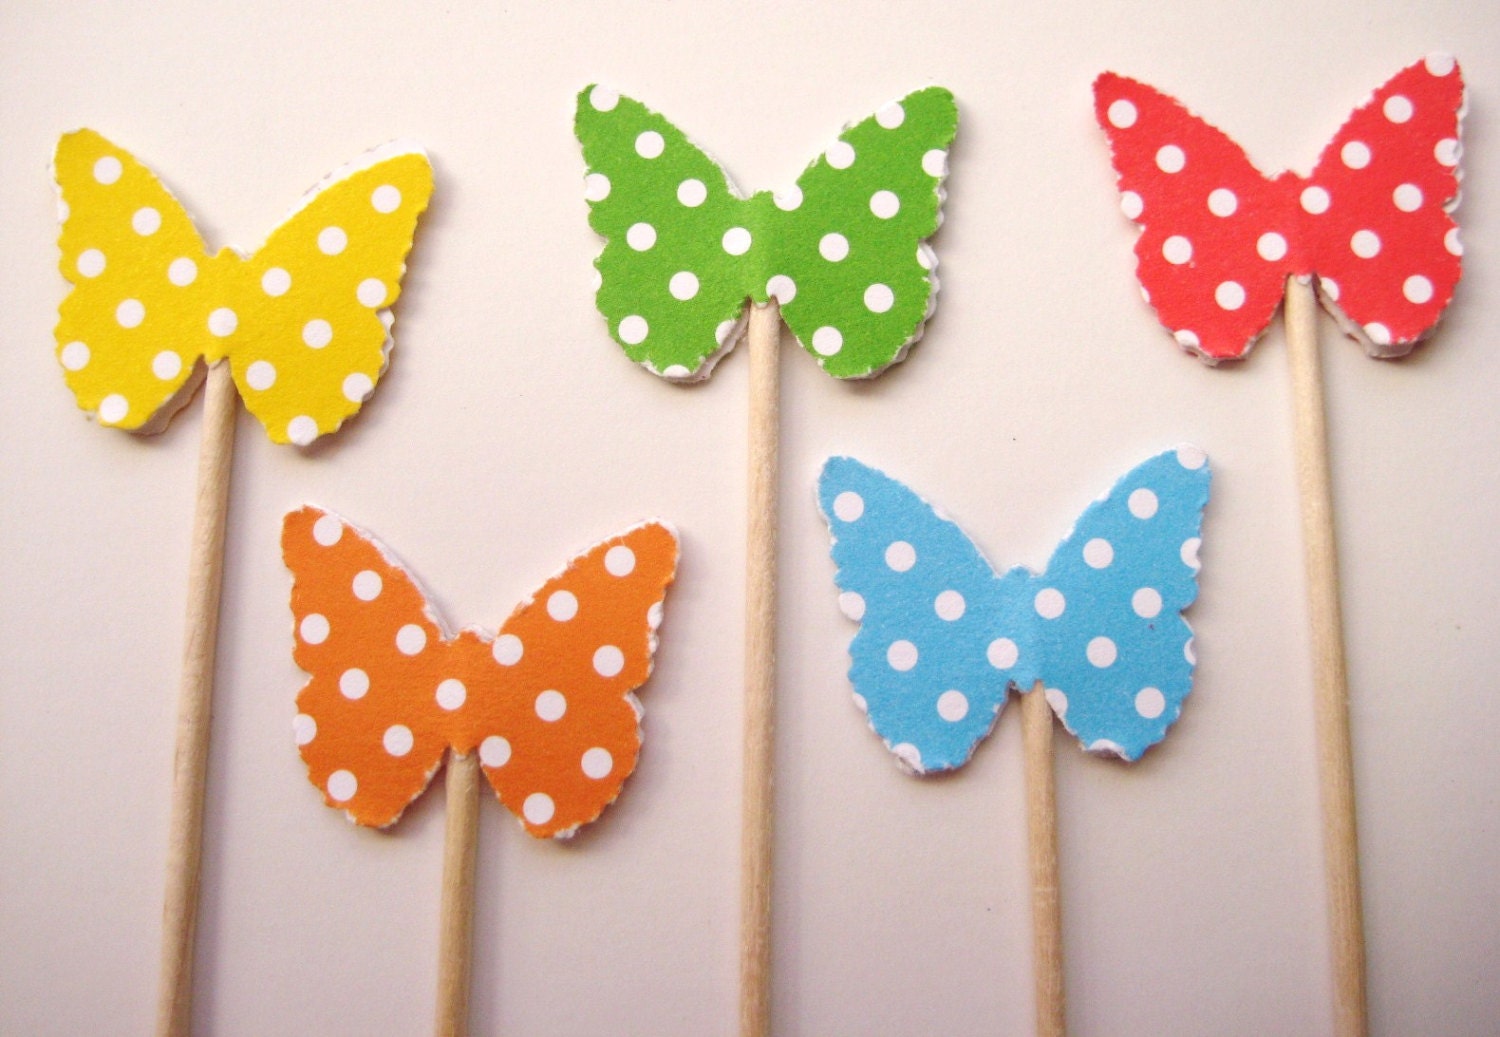 24 Polka Dot Classic Butterfly Party Picks - Cupcake Toppers - Toothpicks - Food Picks - die cut punch FP311